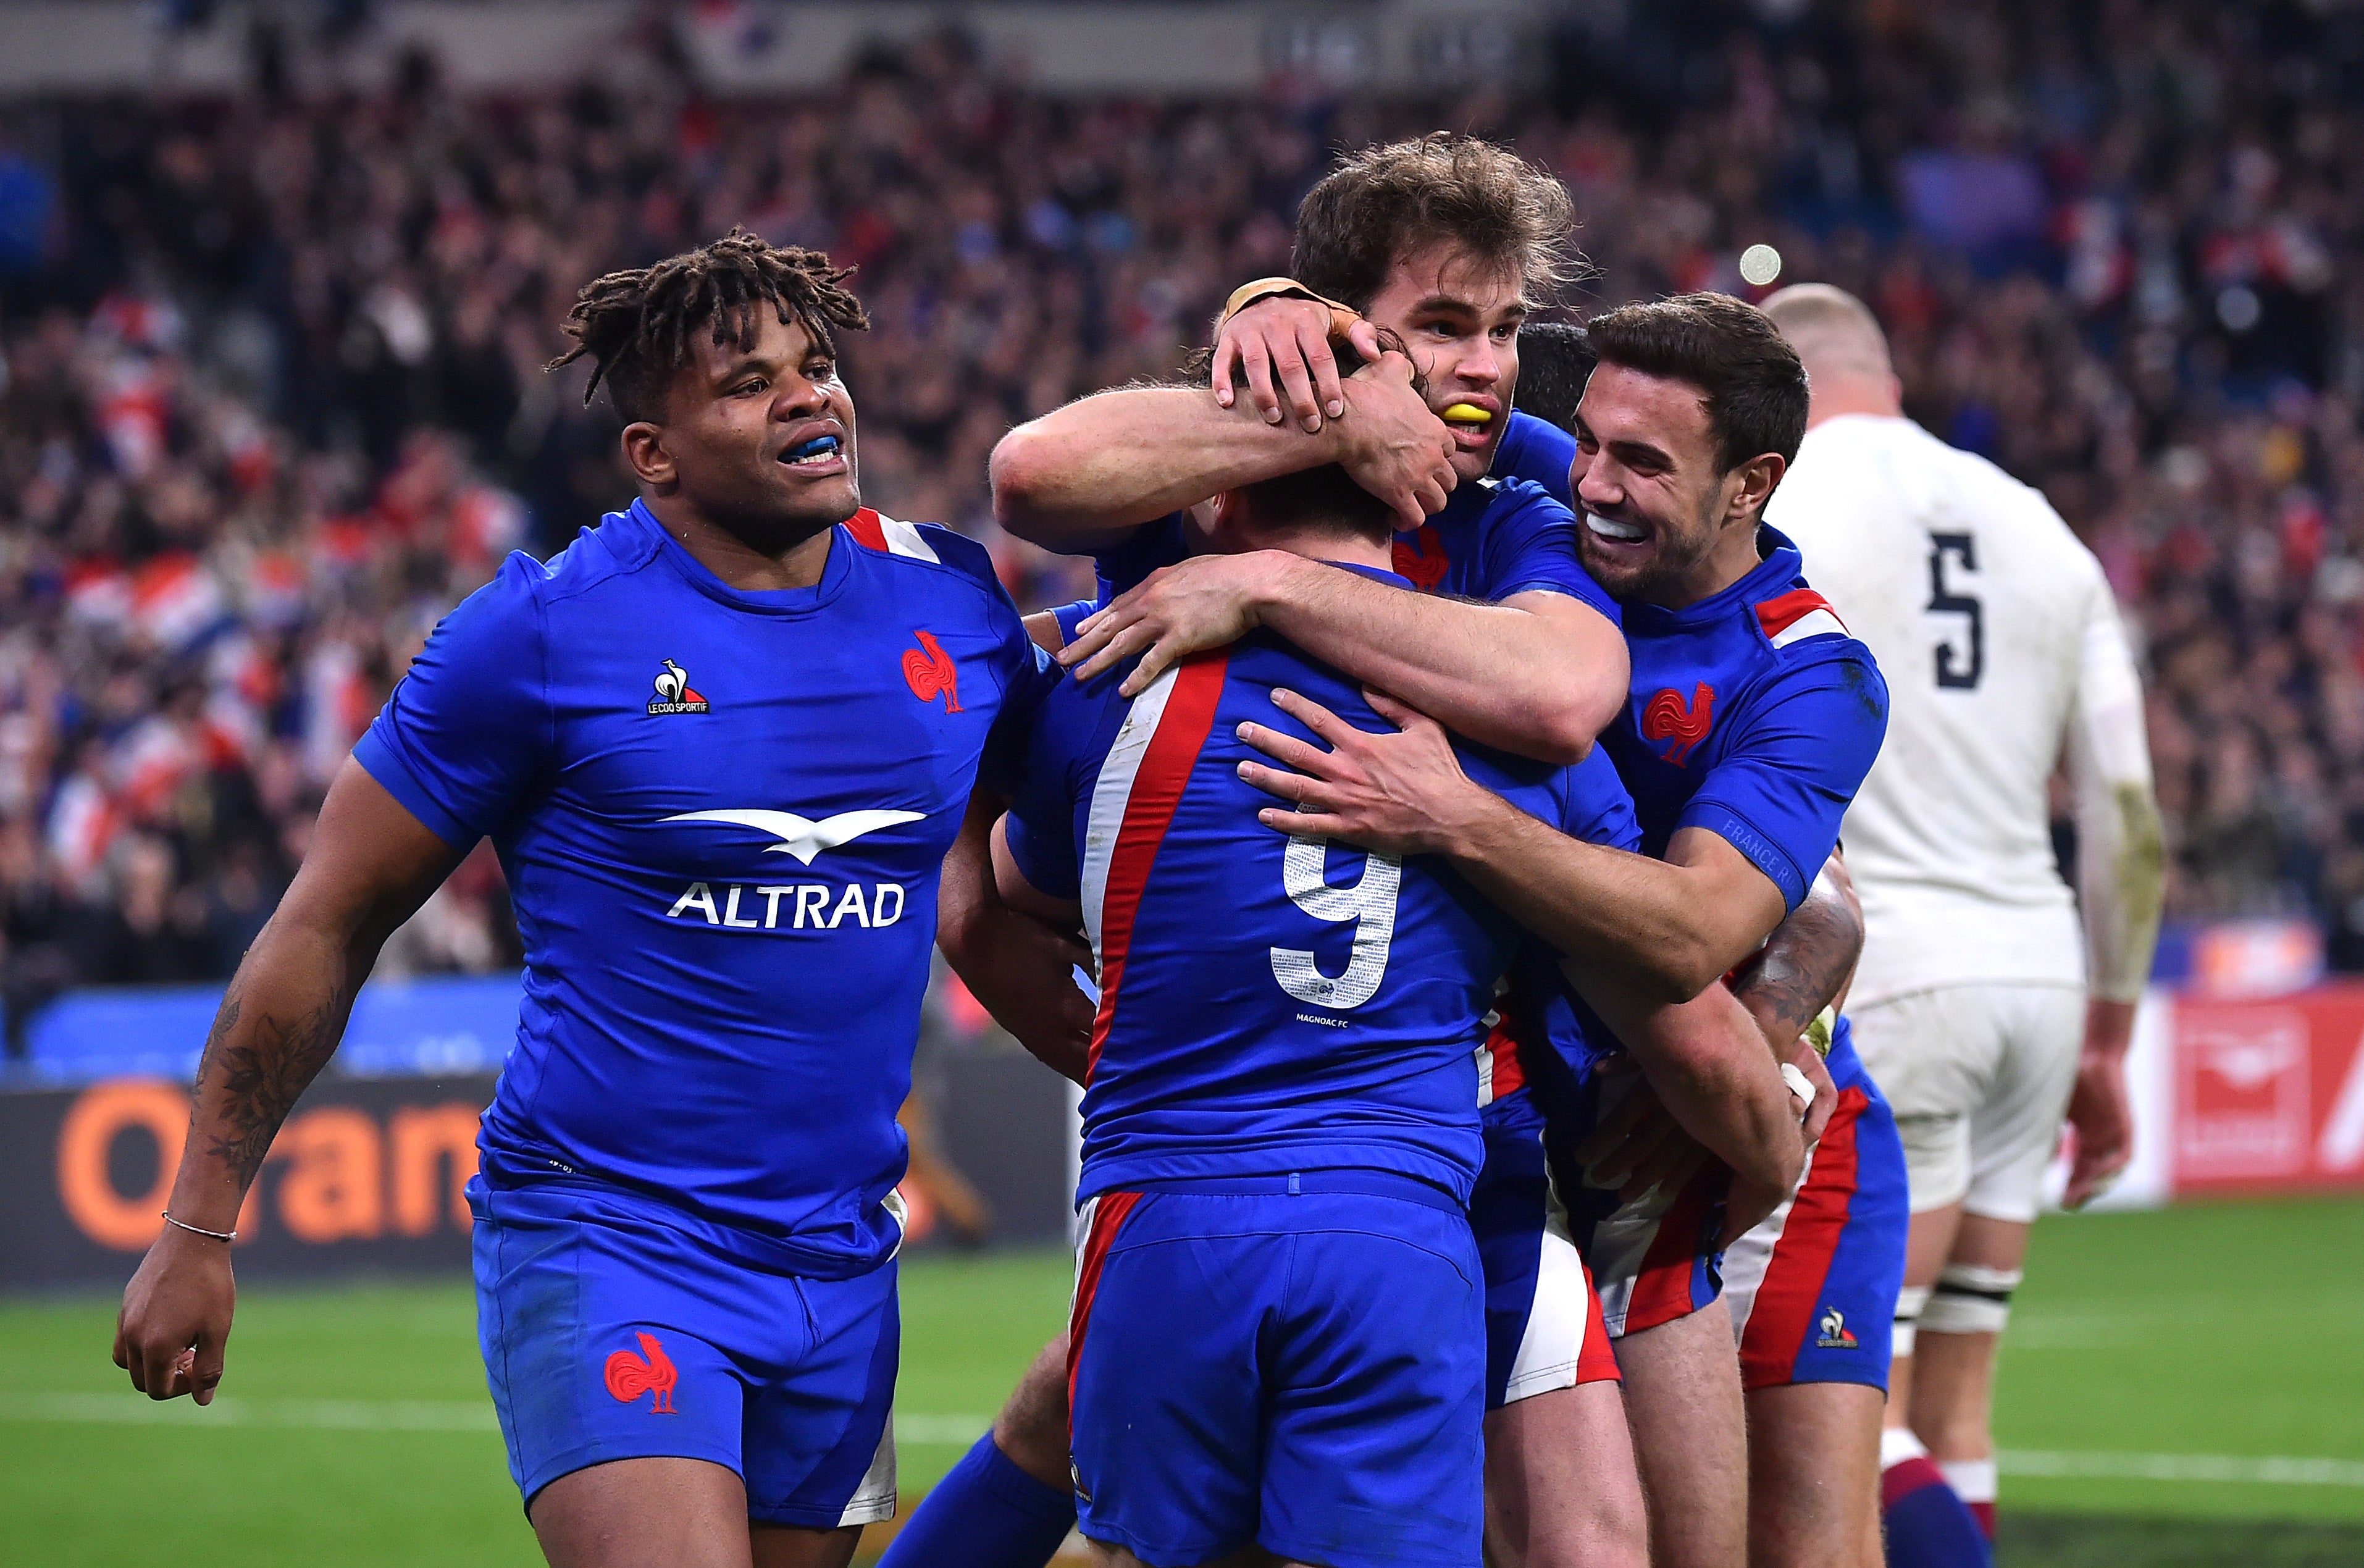 France have won the Six Nations title by beating England